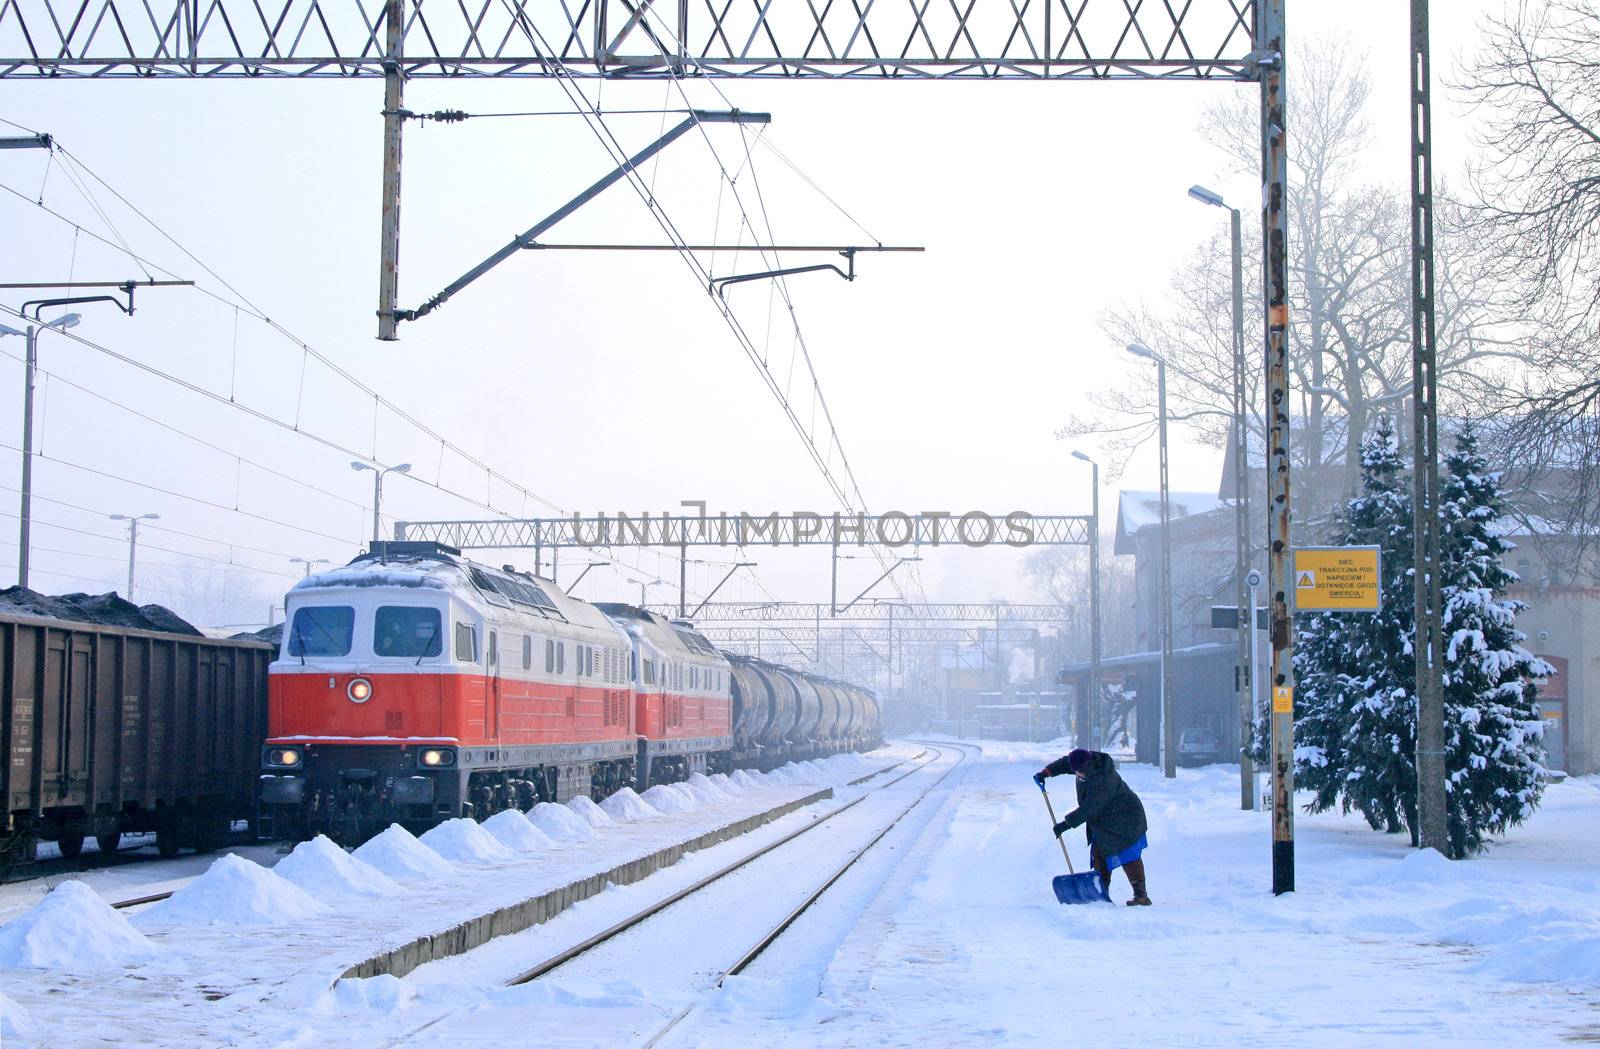 Heavy winter at the railway station by remik44992